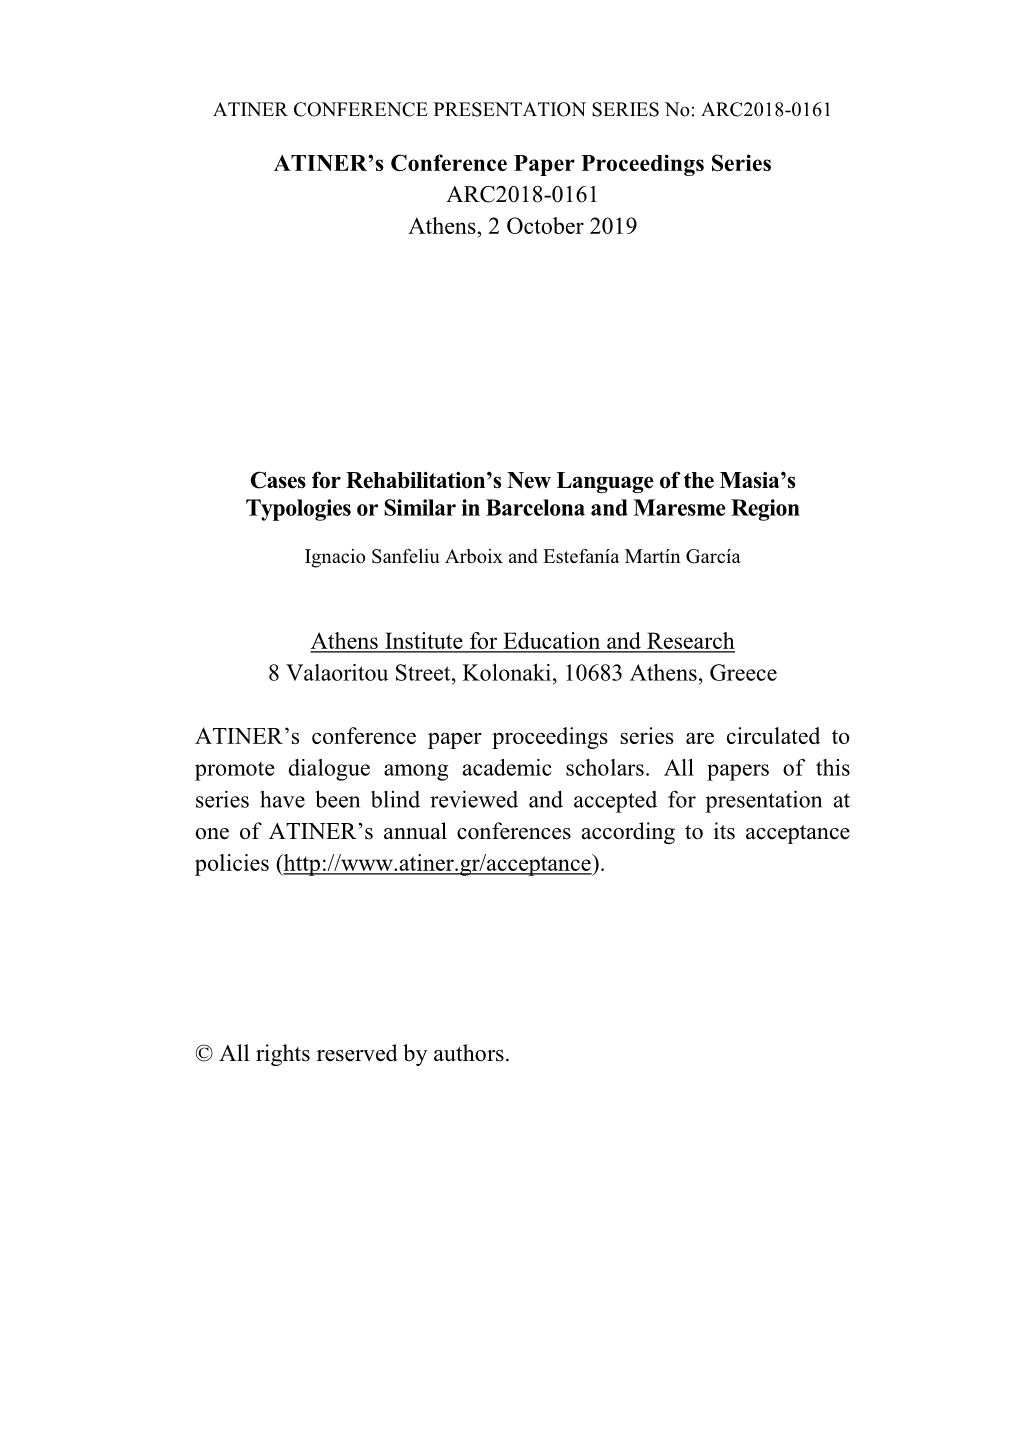 ATINER's Conference Paper Proceedings Series ARC2018-0161 Athens, 2 October 2019 Cases for Rehabilitation's New Language Of